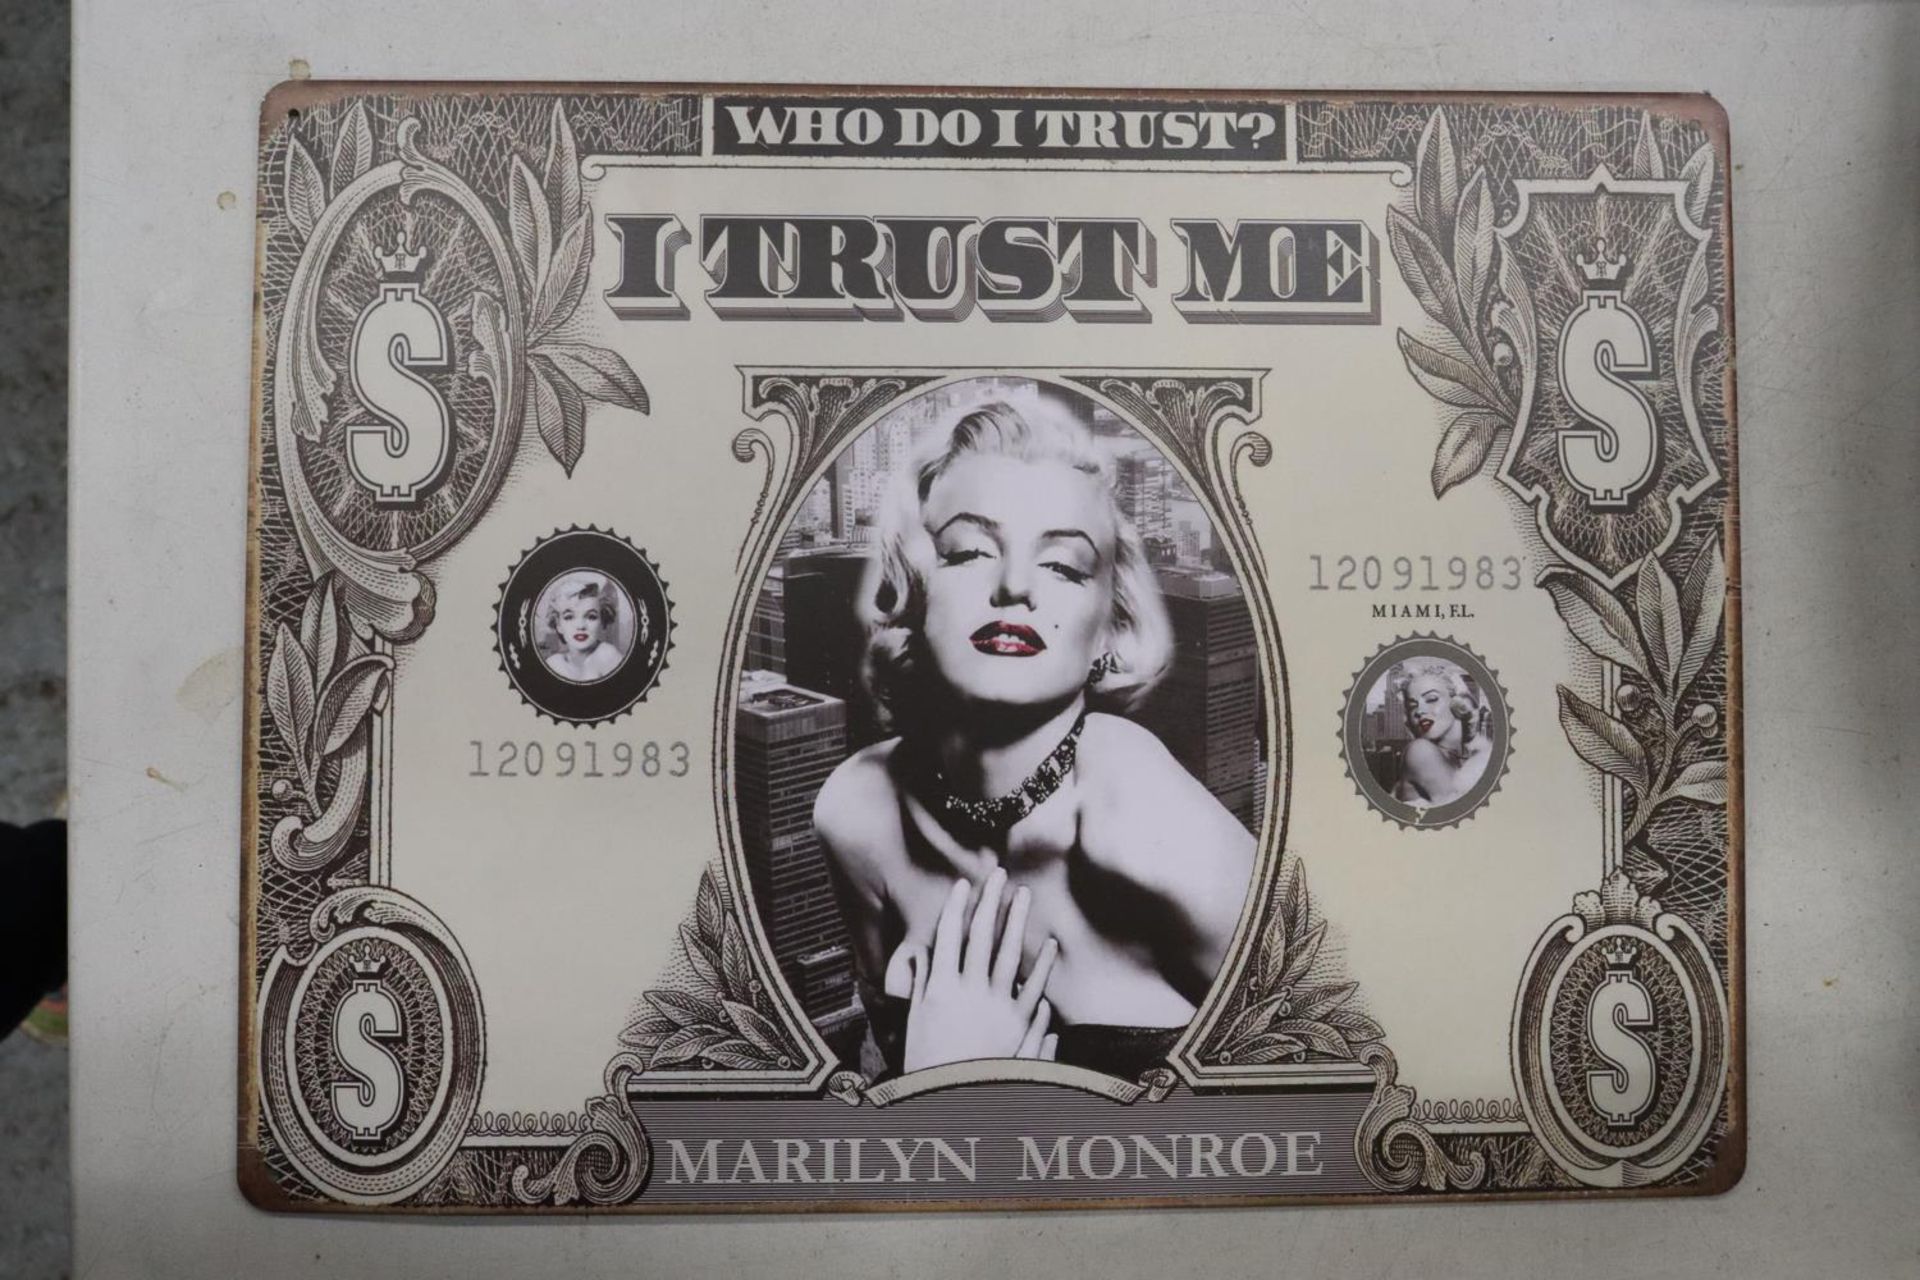 A MAN CAVE METAL MARILYN MONROE NOTE 15 X 12 INCH